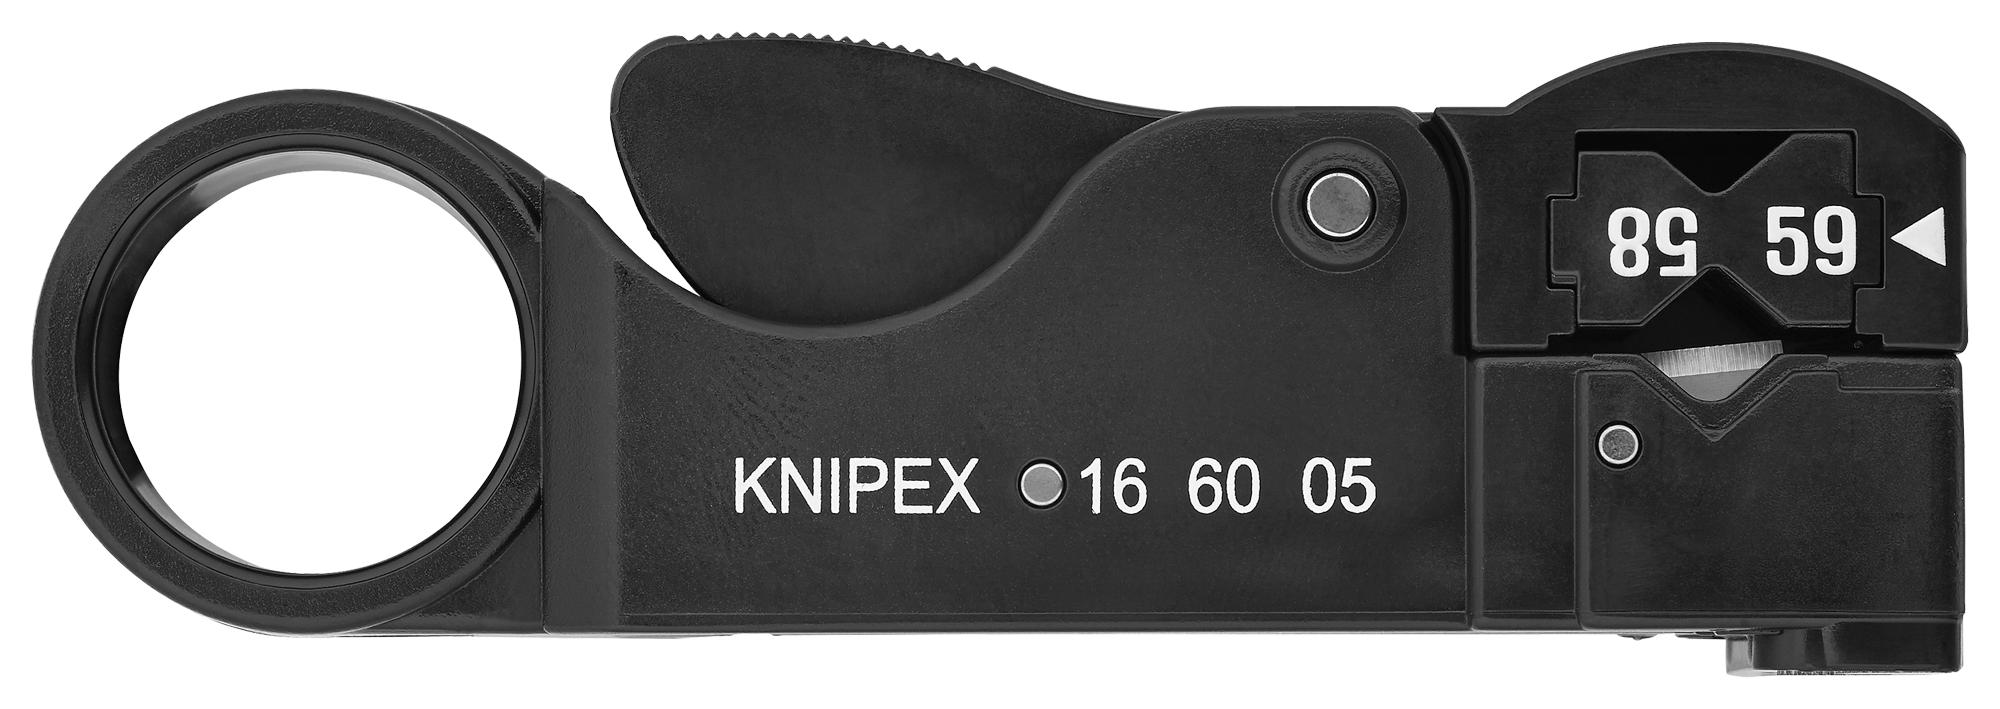 16 60 05 SB CABLE STRIPPER, COAXIAL KNIPEX